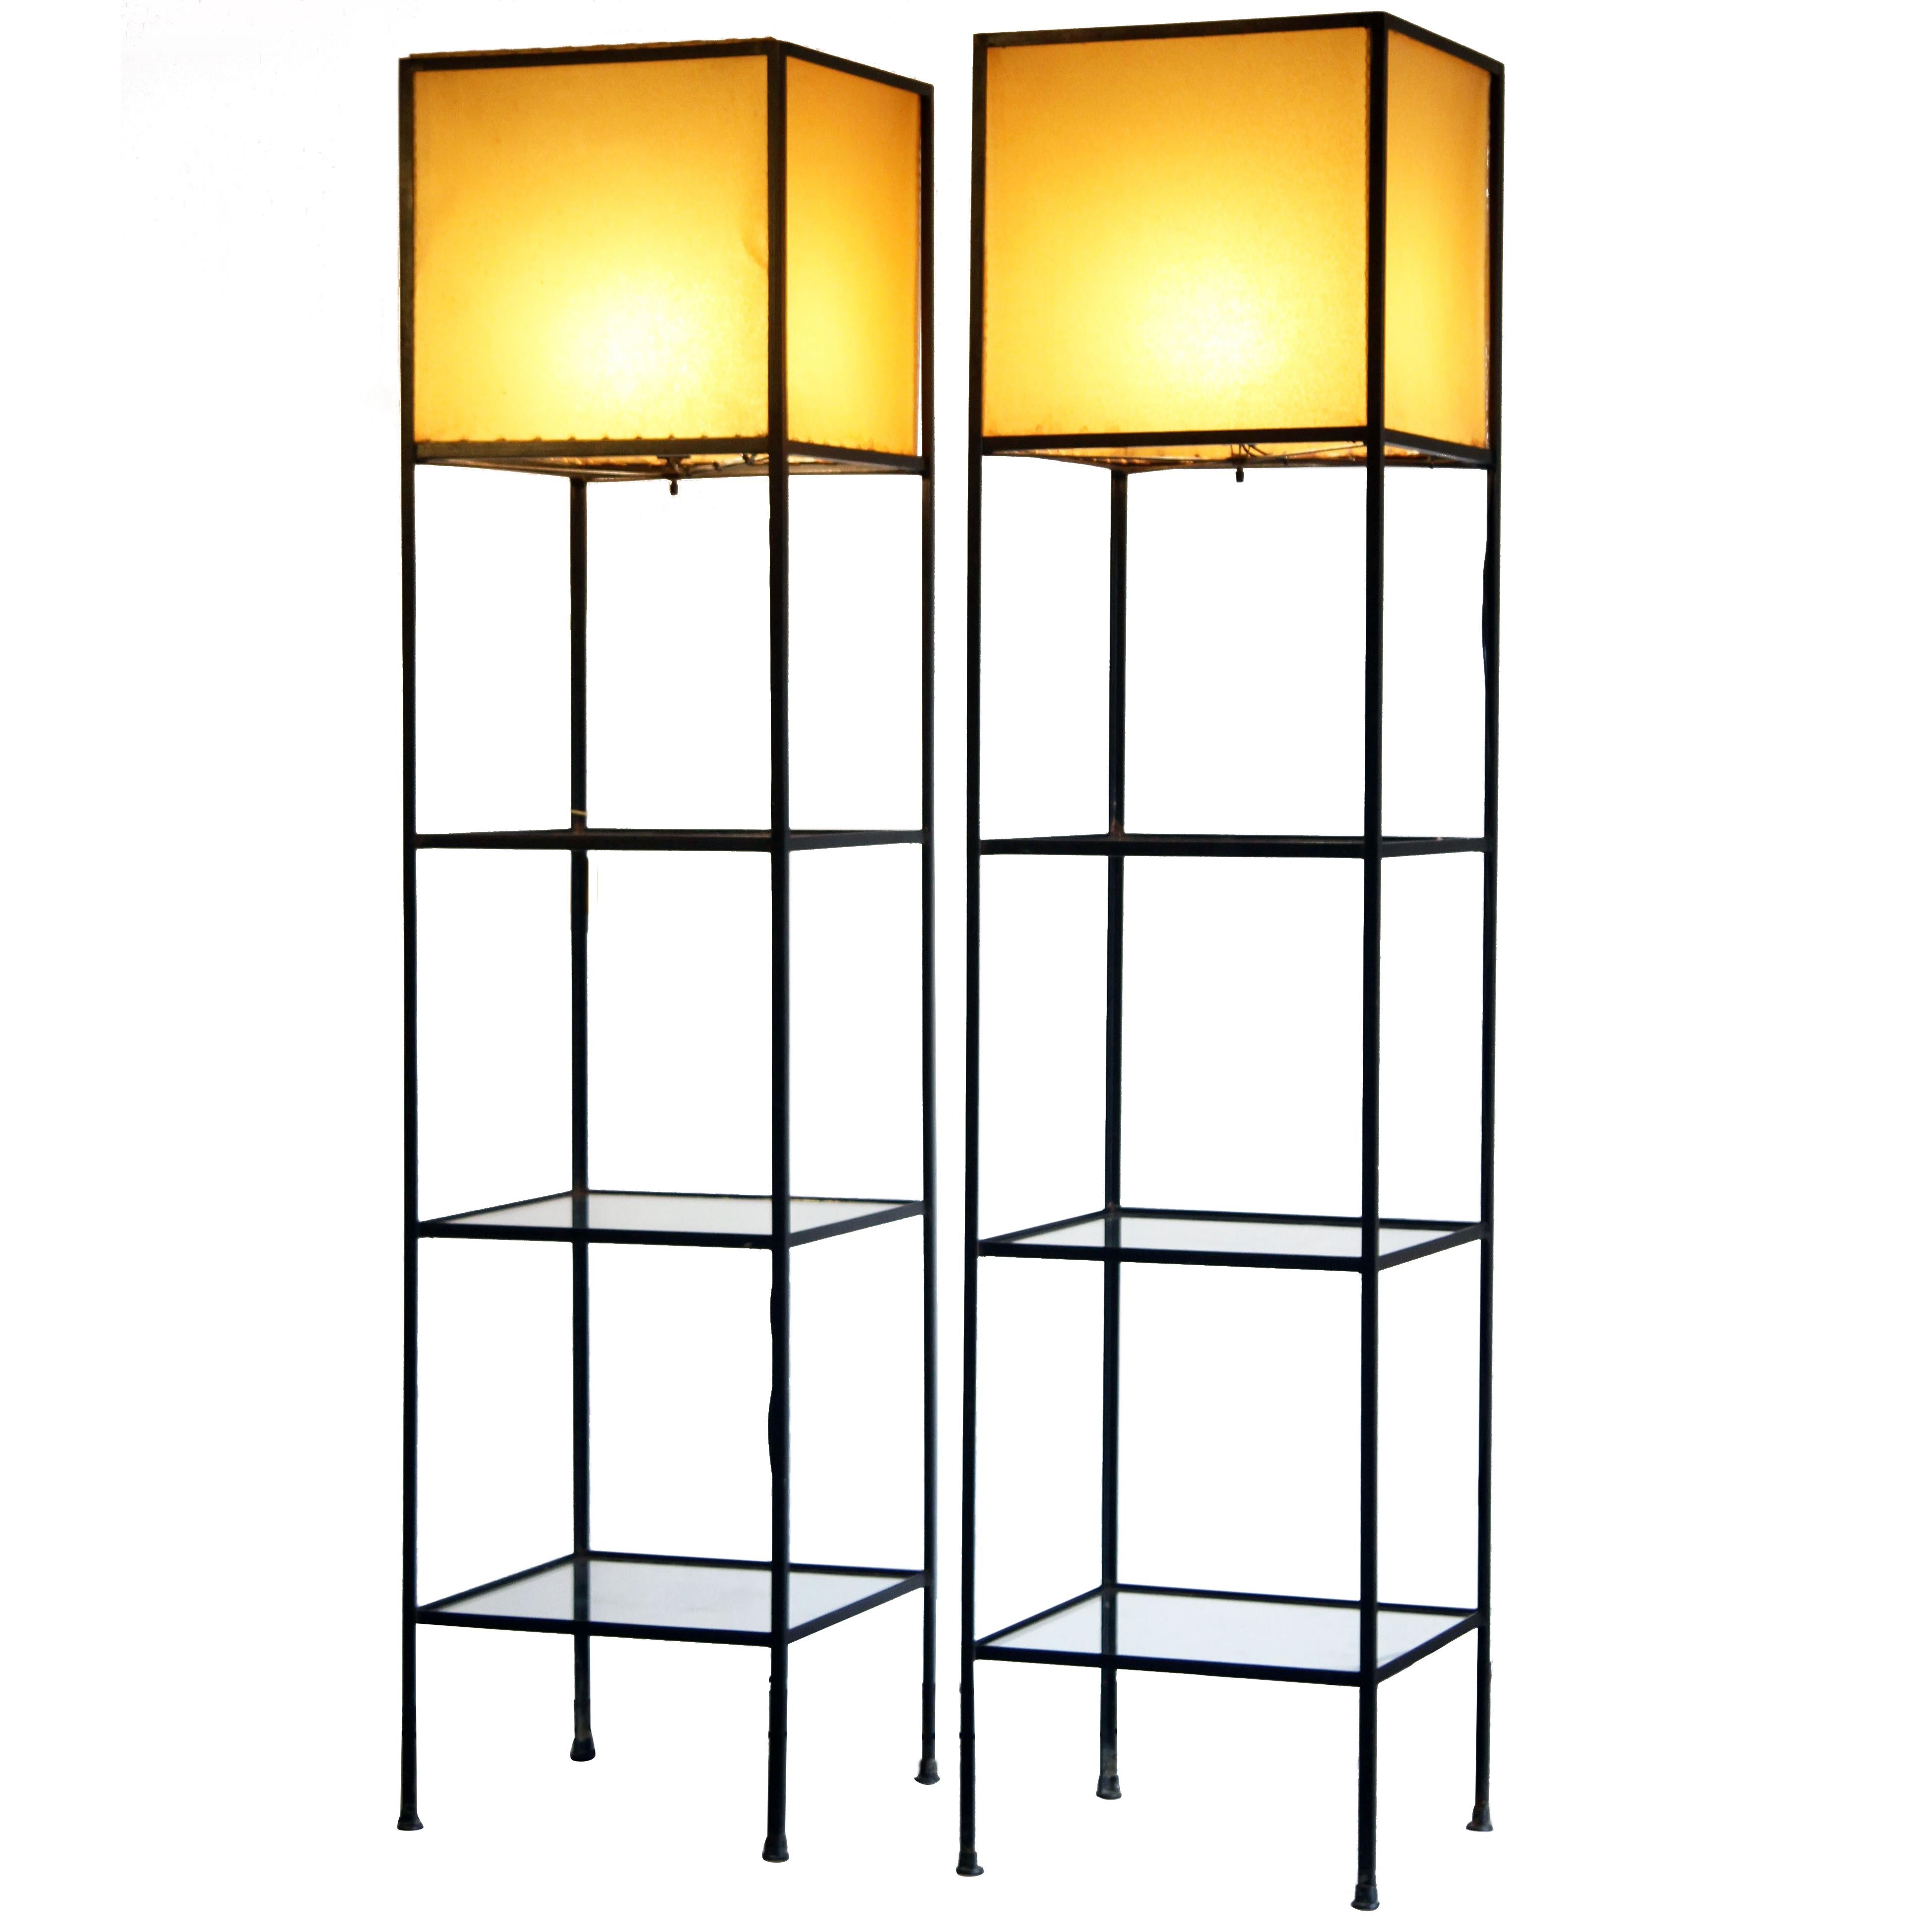 Pair of Architectural Frederick Weinberg Modern Floor Lamps with Shelves